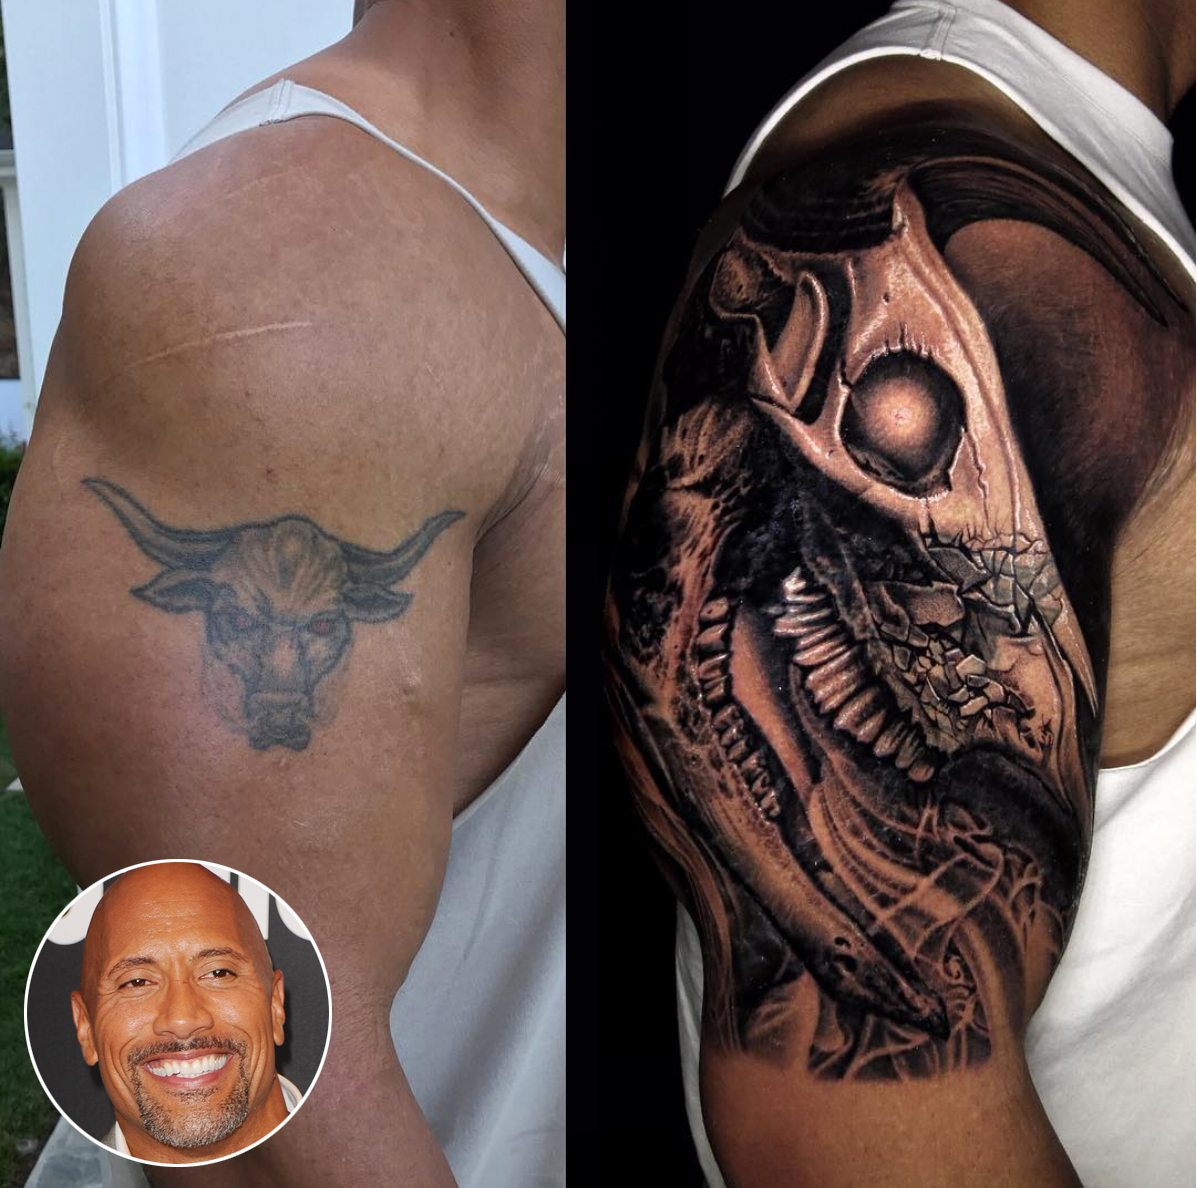 Dwayne The Rock Johnson Changed His Iconic Bull Tattoo People in proportions 1197 X 1188